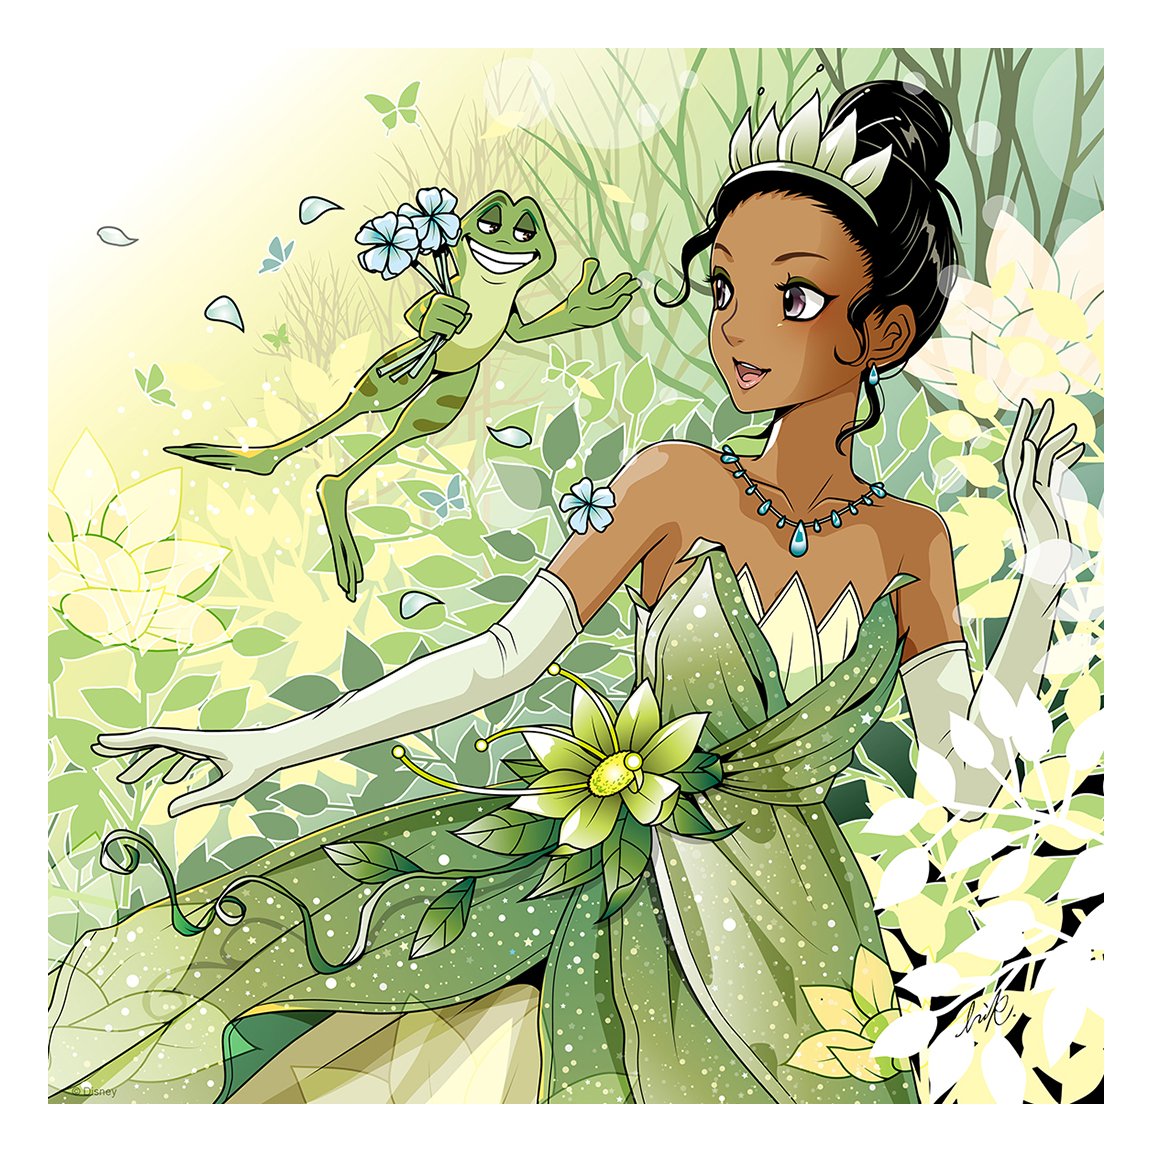 These Never Before Seen Image Of Disney's Princess Tiana Are